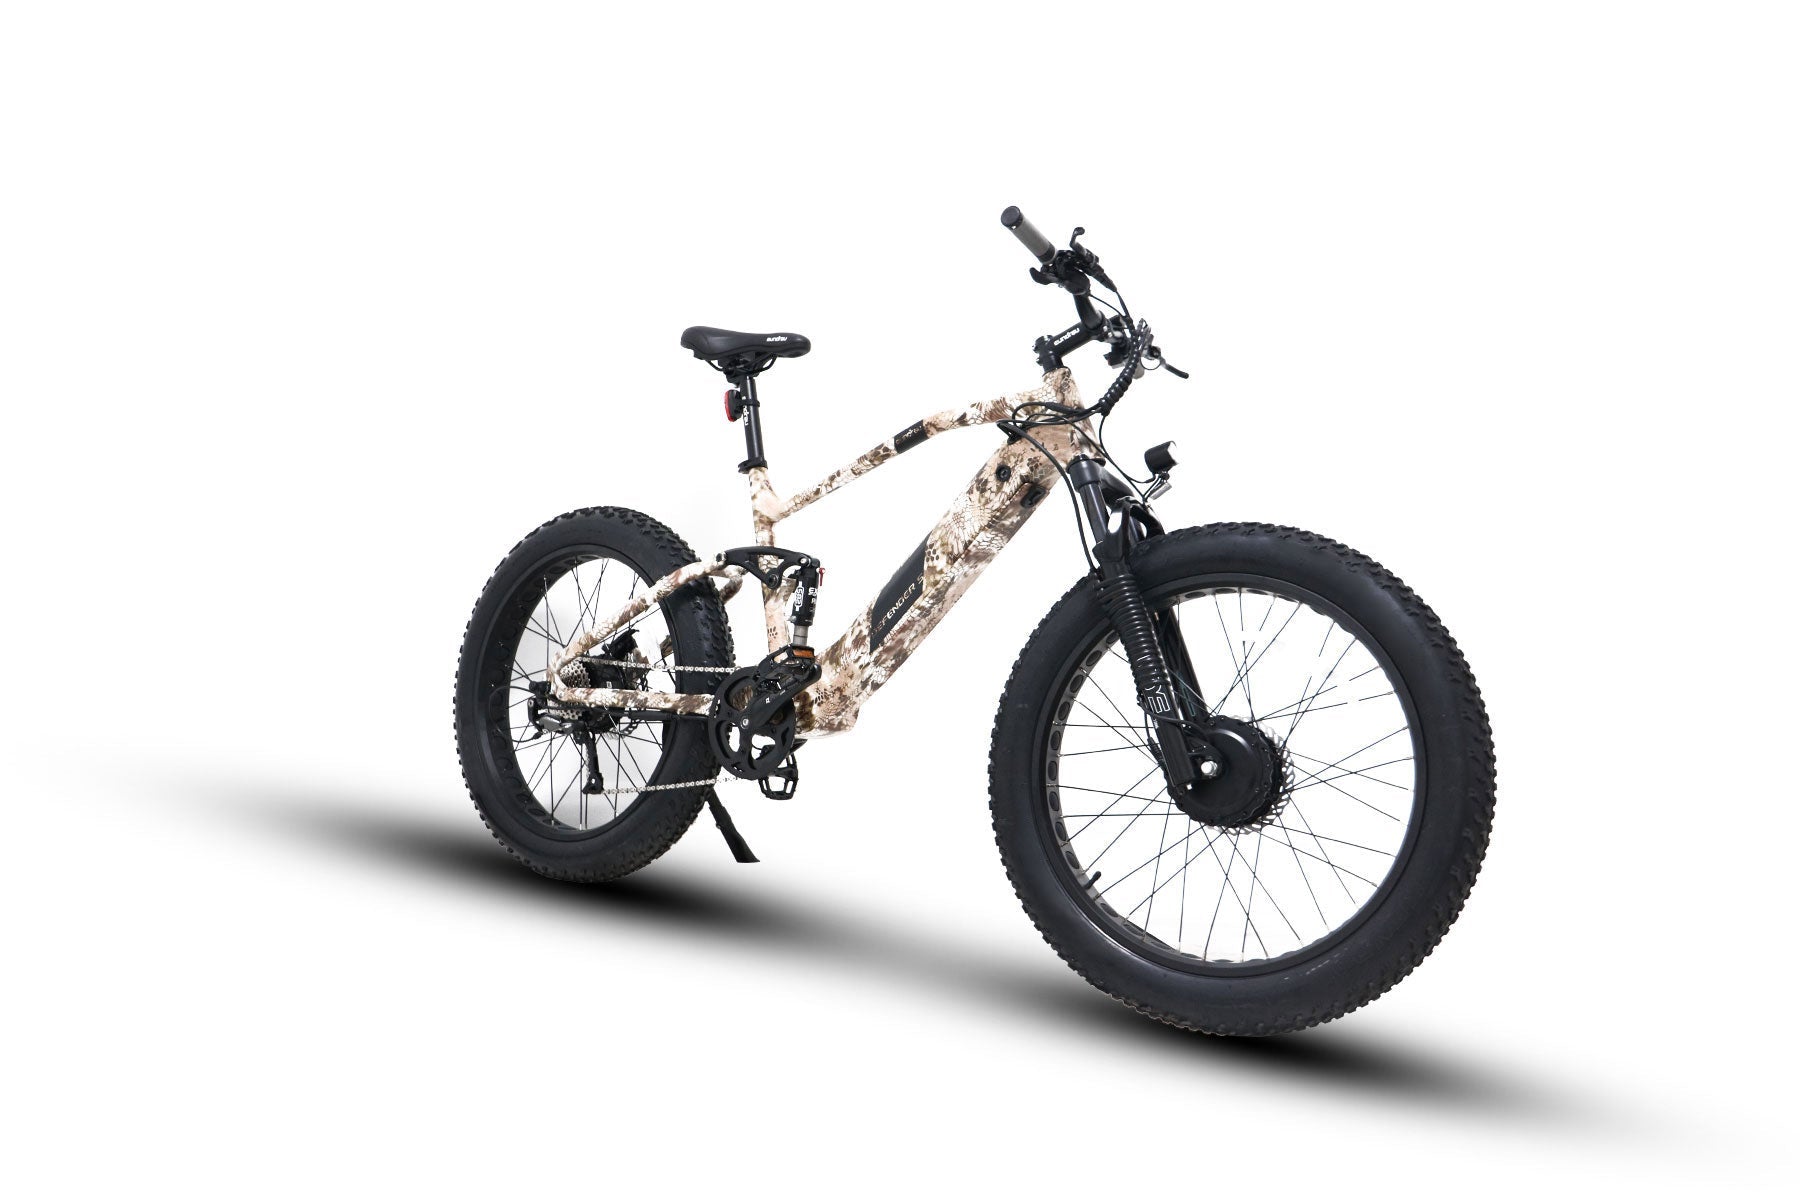 EUNORAU DEFENDER-S, the ultimate e-bike designed to conquer any terrain and weather condition with its dual suspension, dual motor, and dual battery system. With 1500 watts of power, EXA rear suspension and RST suspension fork provide maximum comfort and control, while the removable battery system, efficient brakes, and 9-speed freewheel offer unmatched convenience and safety. The LCD display shows battery life, speed, mileage, and pedal assist level, and the front light ensures safe night riding. 